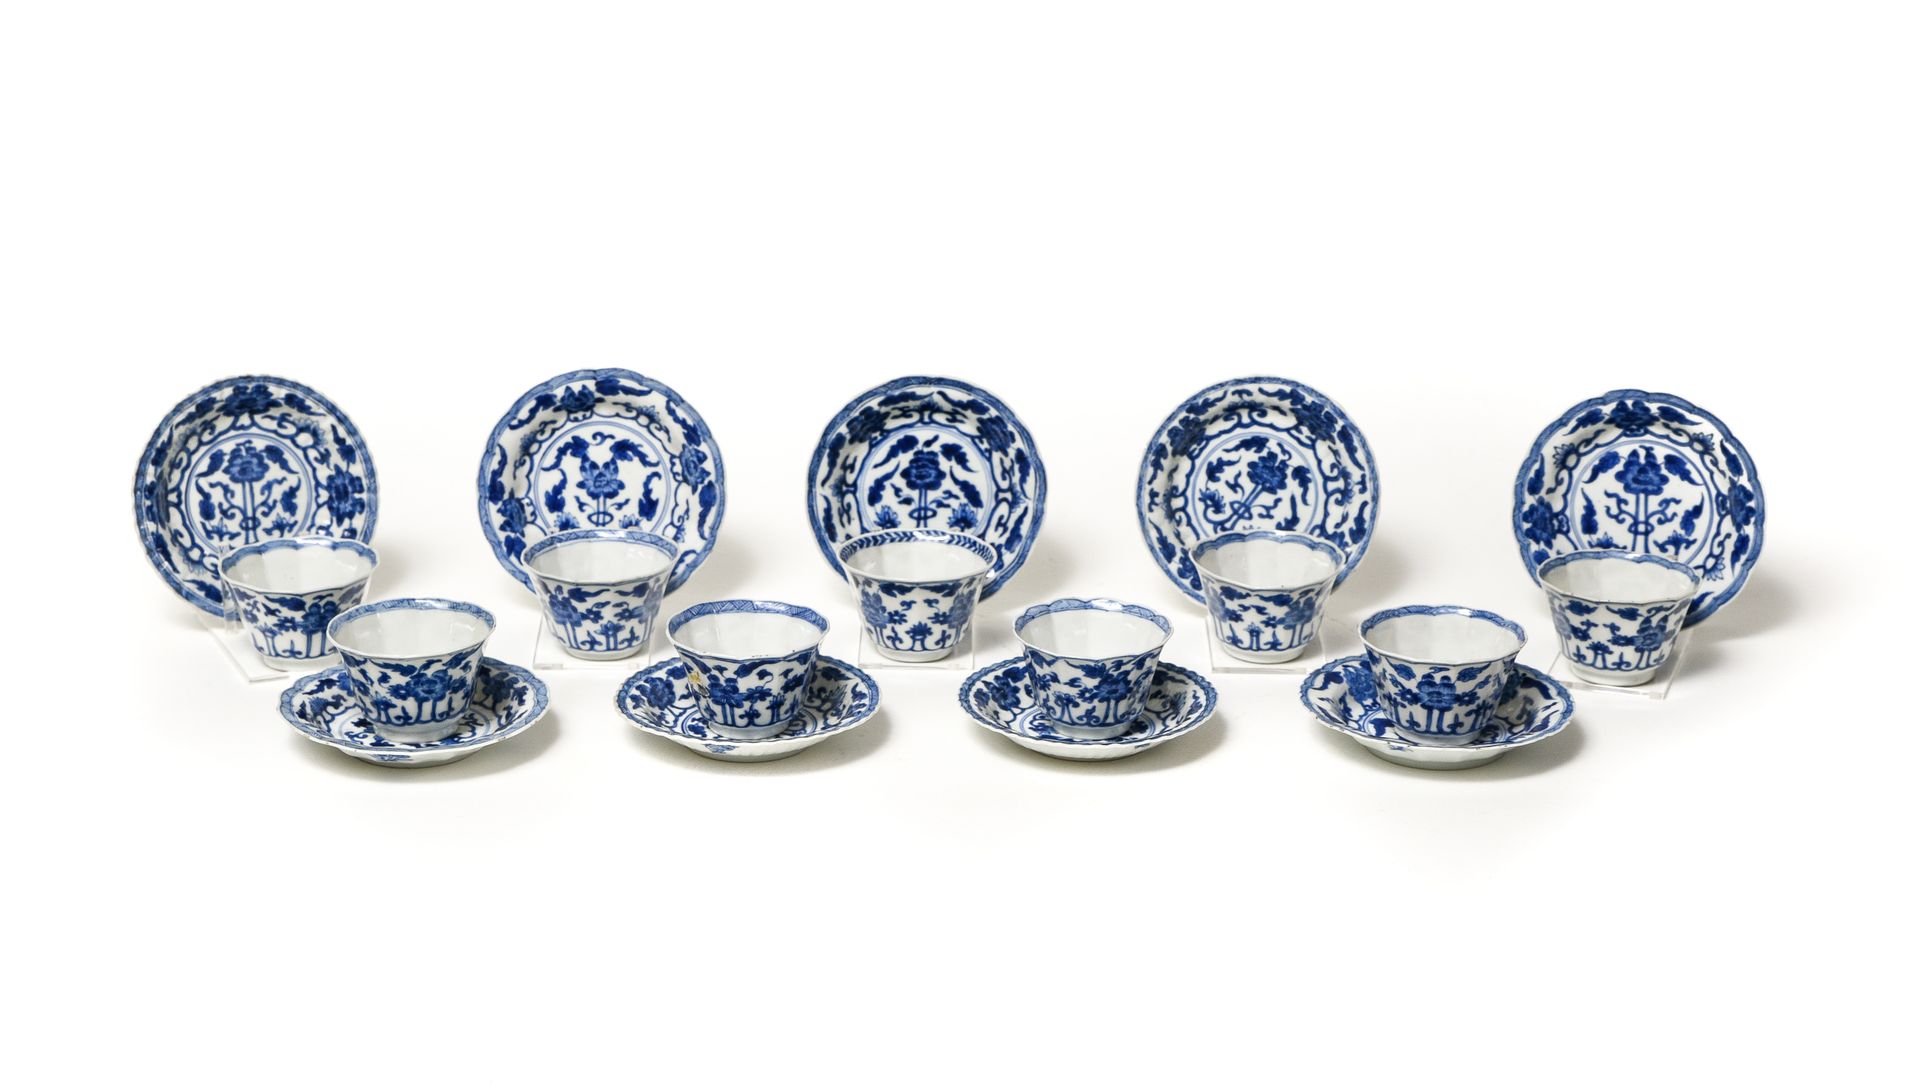 Null Set composed of 32 sorbet dishes and saucers

CHINA - 18TH CENTURY

Porcela&hellip;